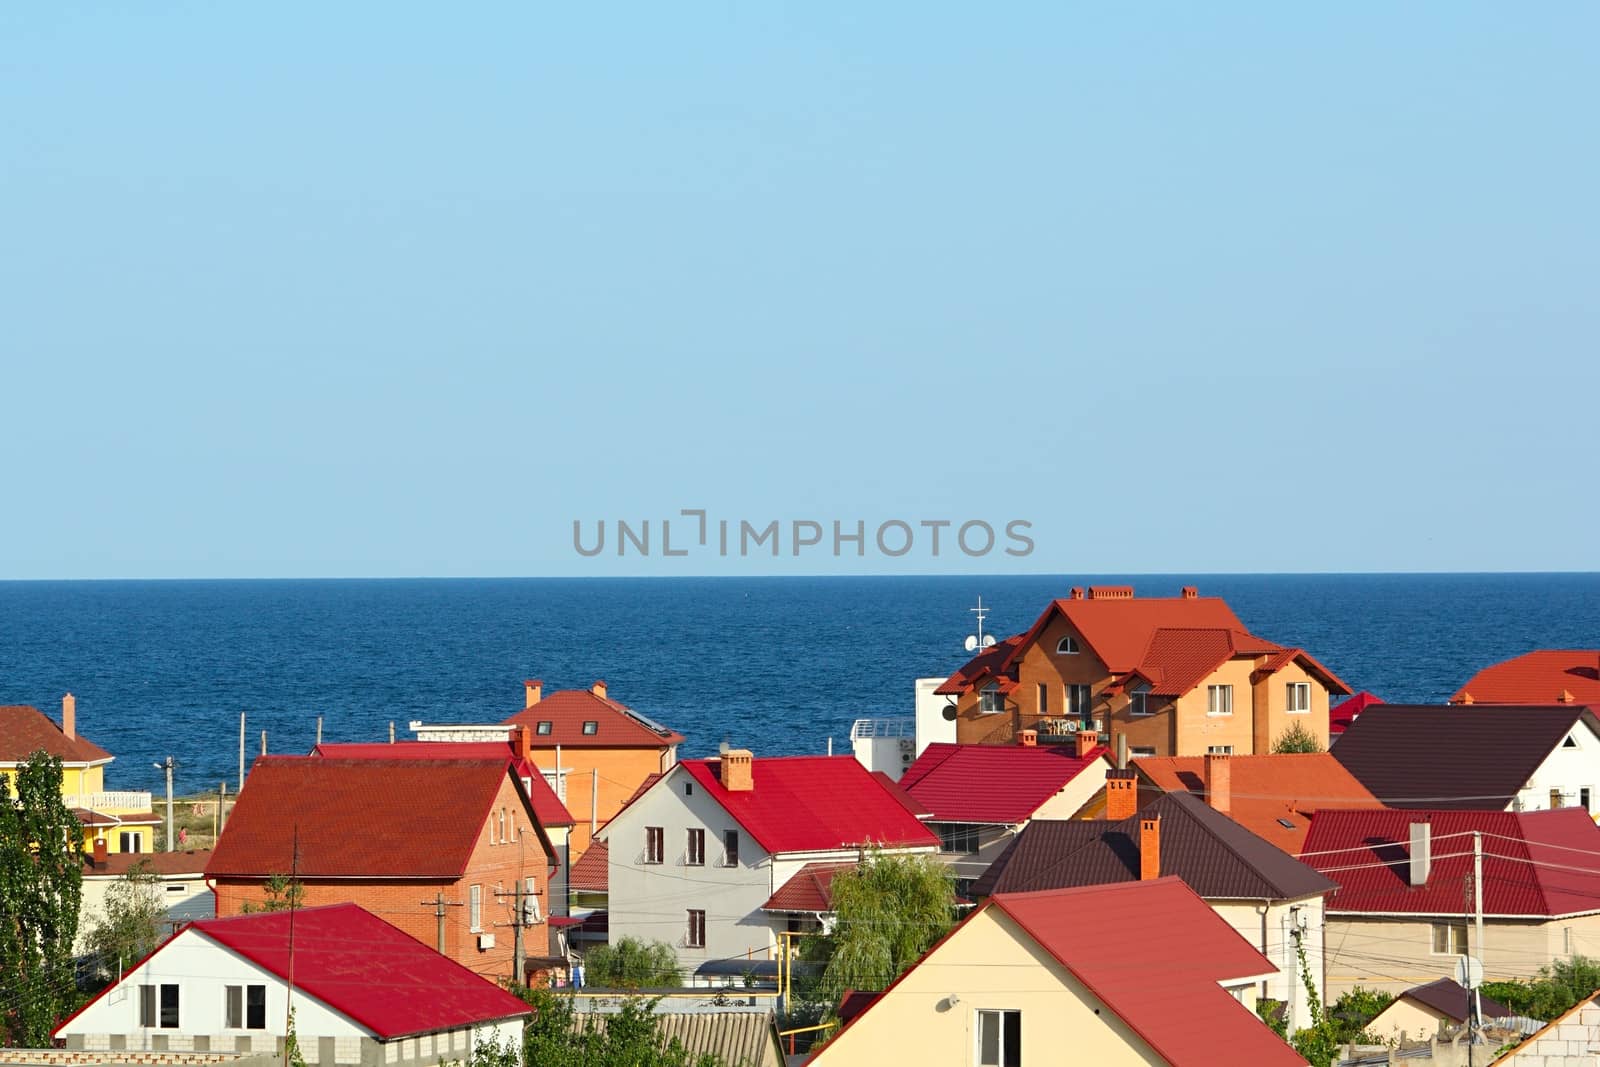 Colored roofs at the seashore by dedmorozz